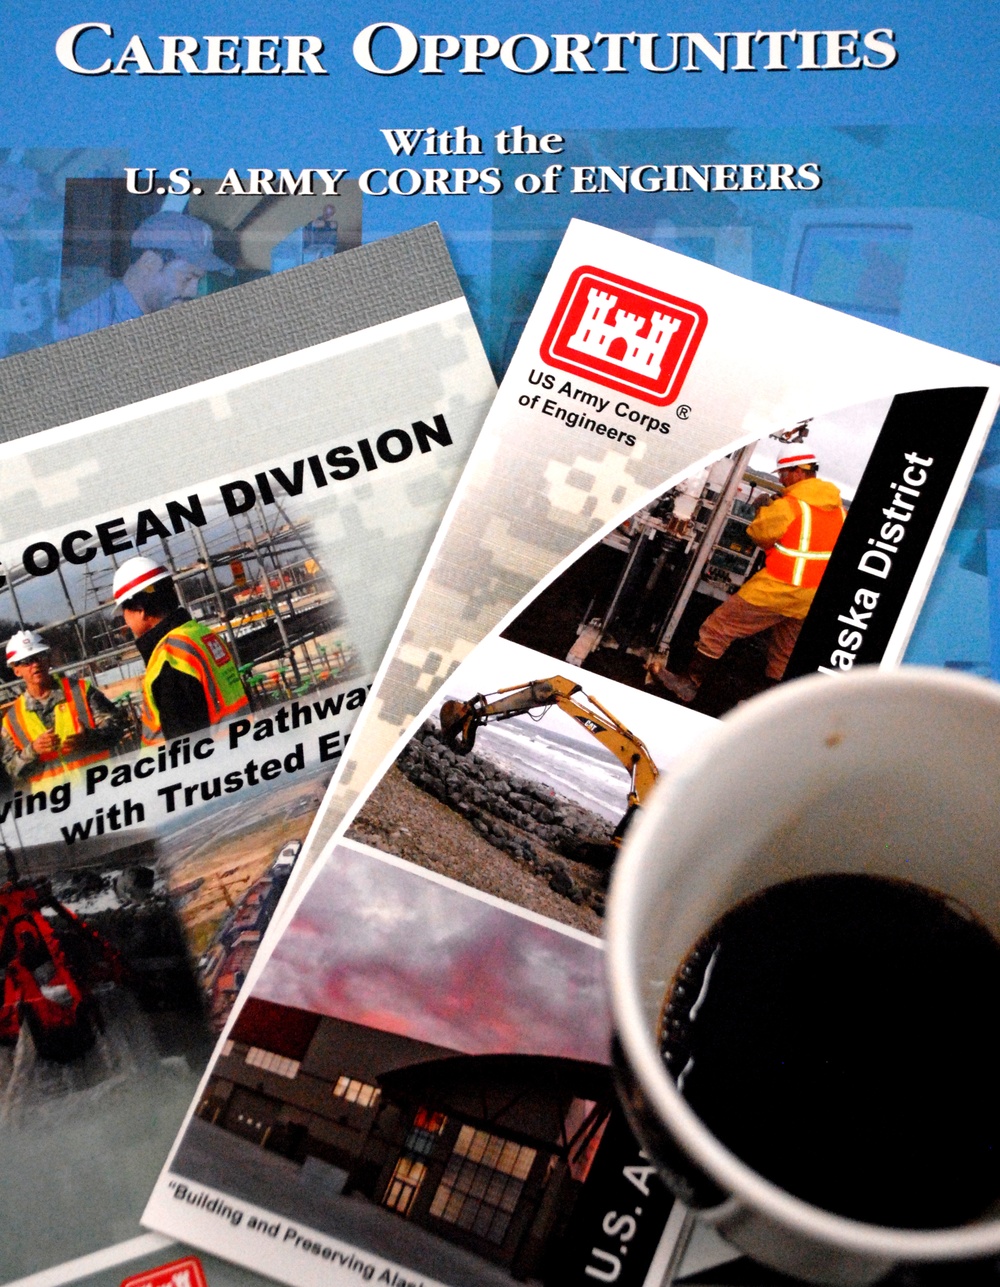 Despite Army reductions, Corps of Engineers hiring in Alaska